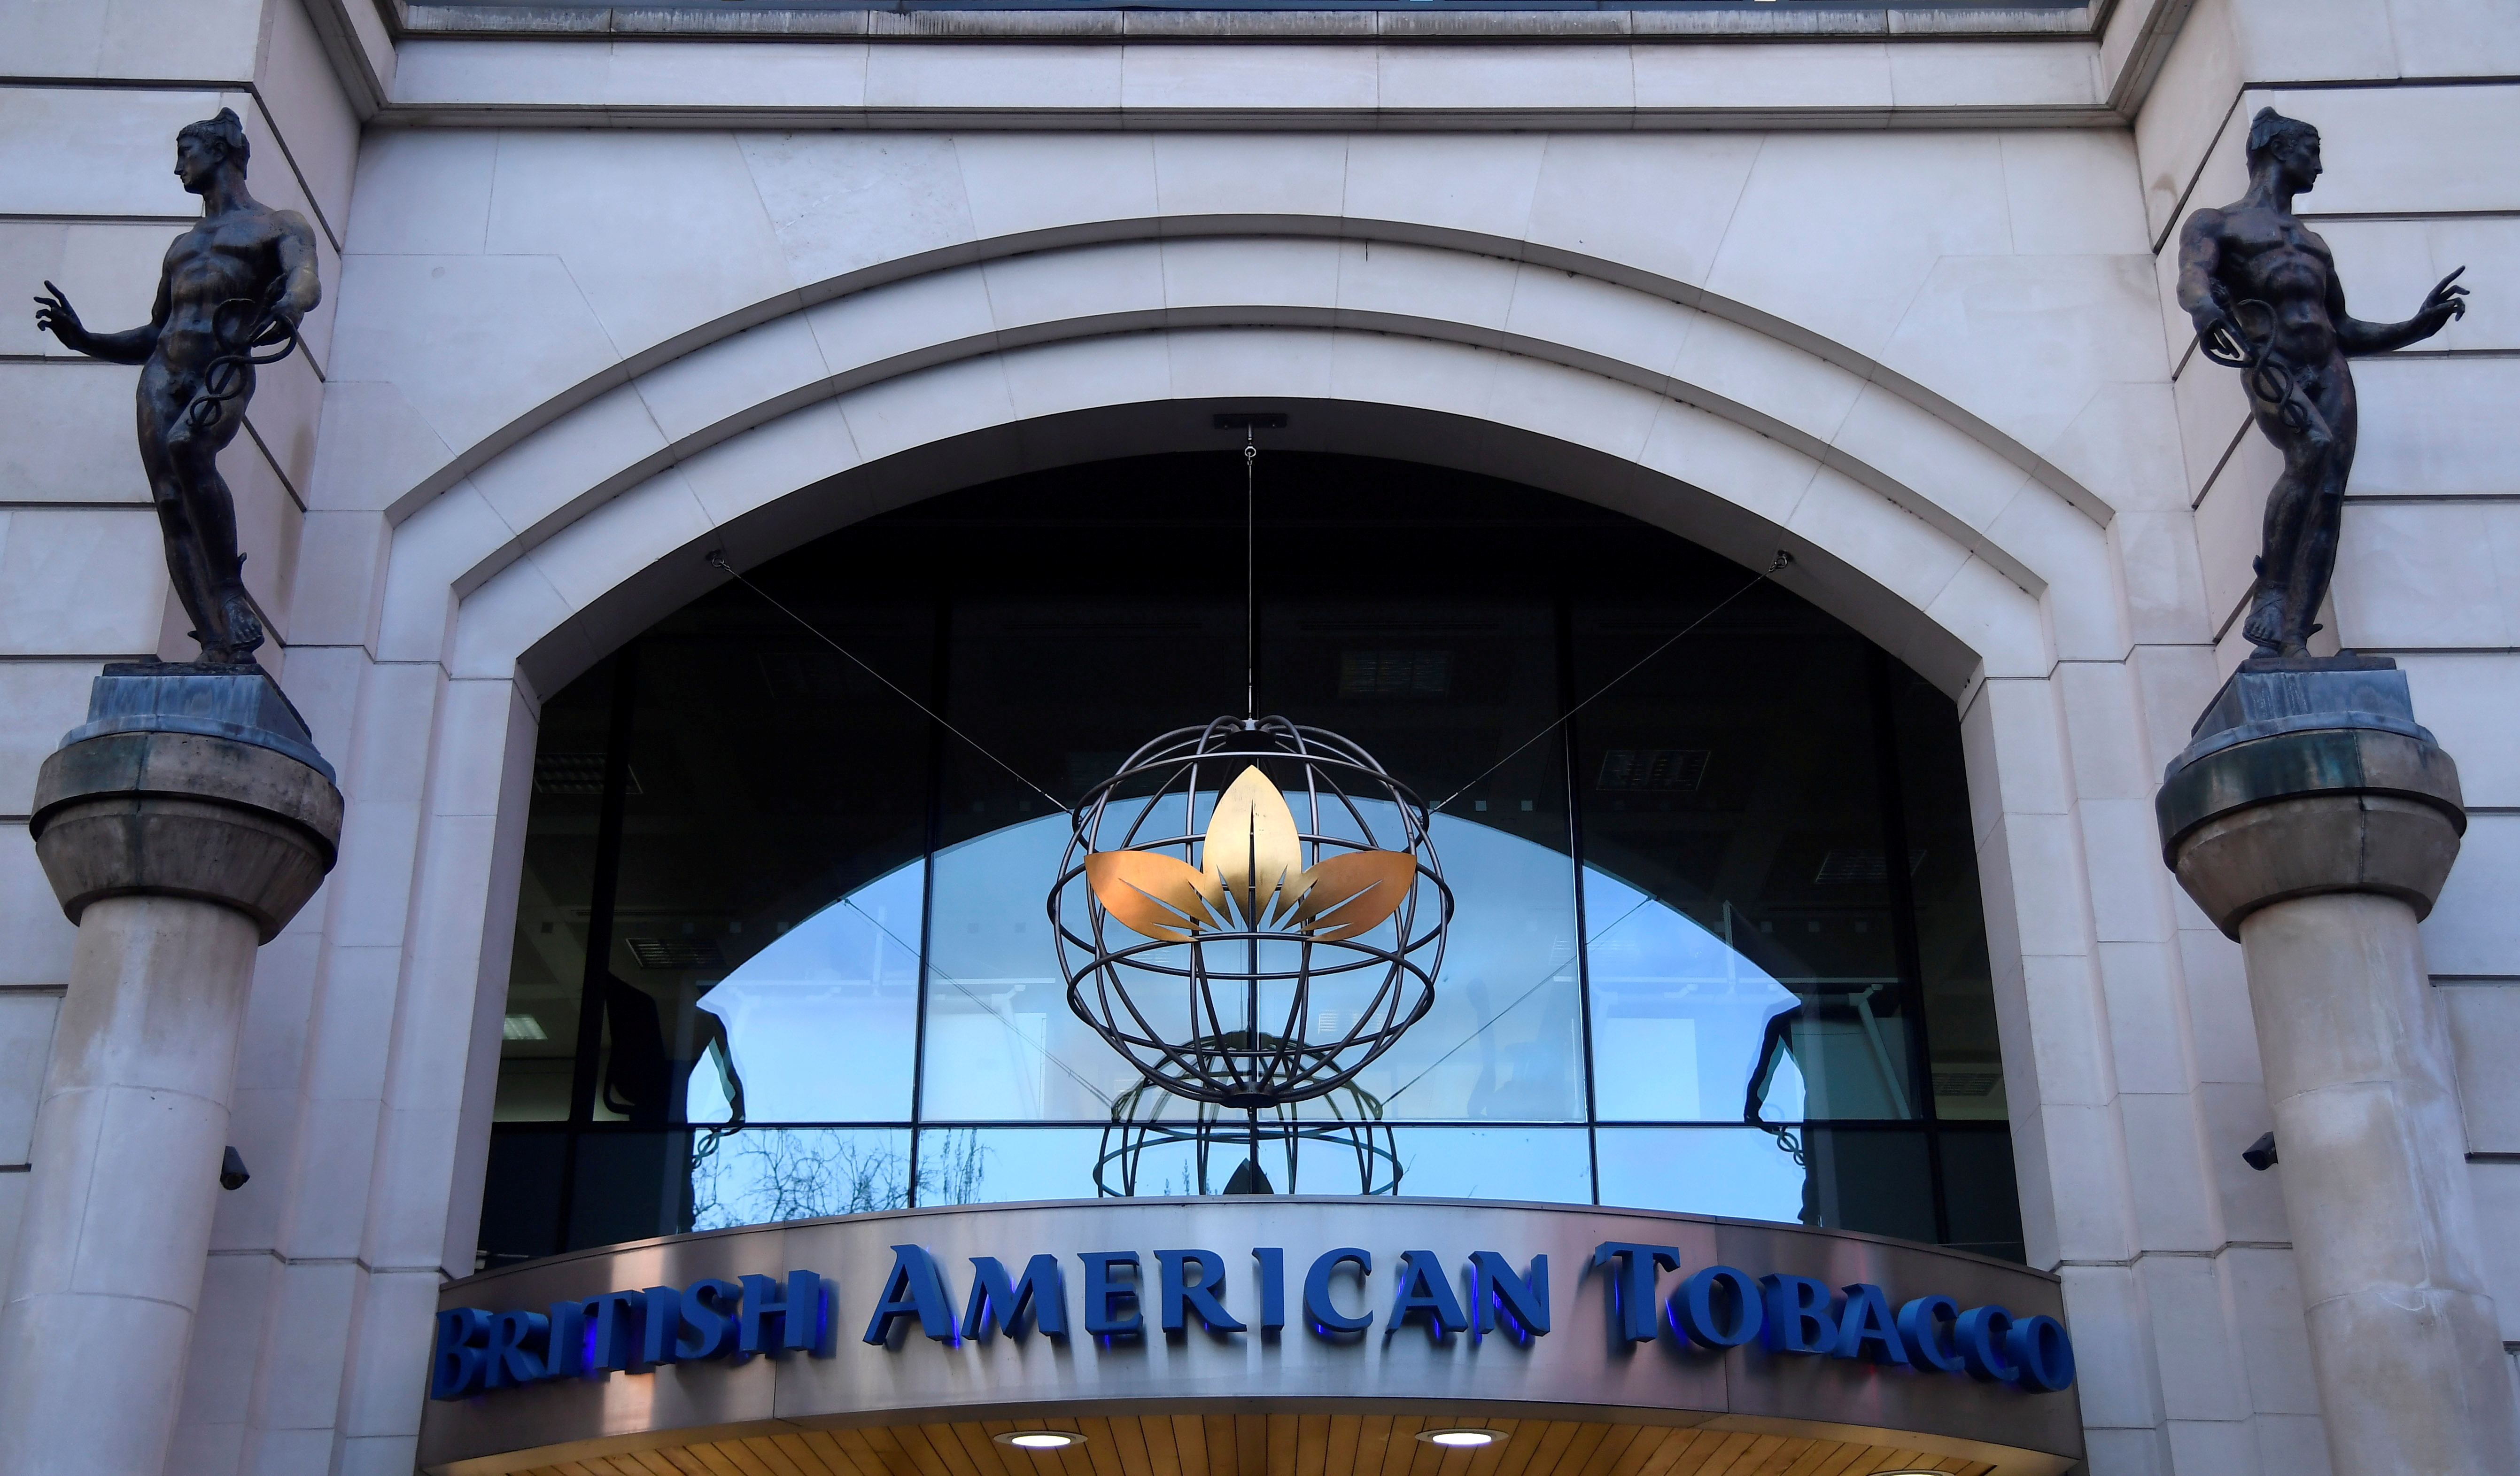 Signage is seen at the London offices of British American Tobacco, in London, Britain